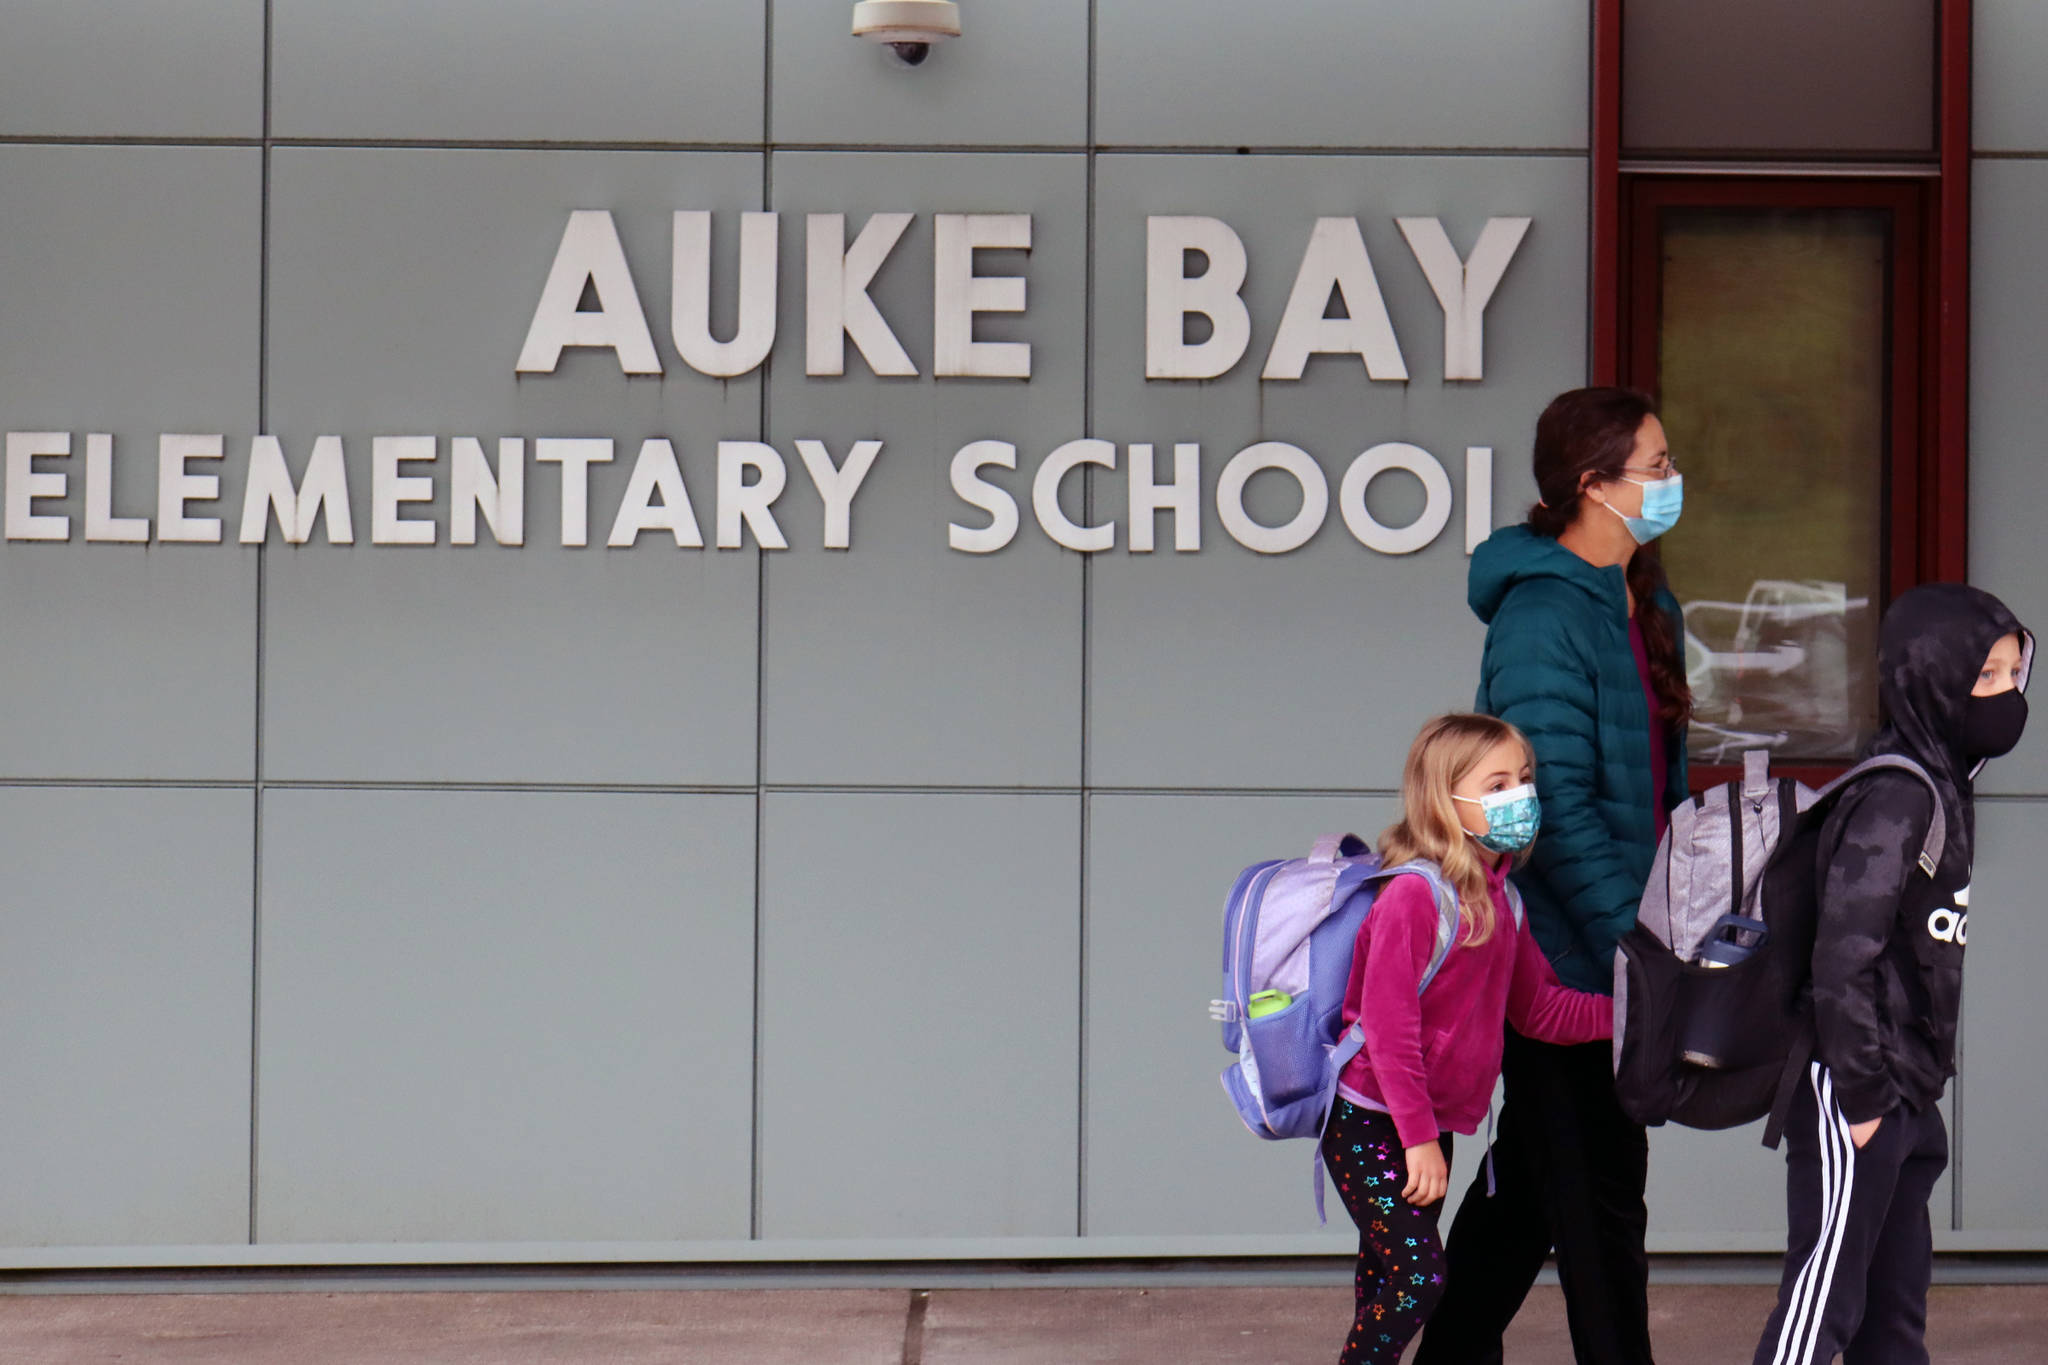 Kalei Shotwell walks third grade student Loche Hanselman and first grade student Ady Hanselman into Auke Bay Elementary School on Monday morning. Shotwell said she was both excited and nervous about the return of in-person, five-days-a-week school. Shotwell said she is impressed with Juneau School District’s mitigation policies. “I give the school a lot of credit,” Shotwell said. “It feels normal, and I think that’s a big deal for most people.” (Ben Hohenstatt/Juneau Empire)